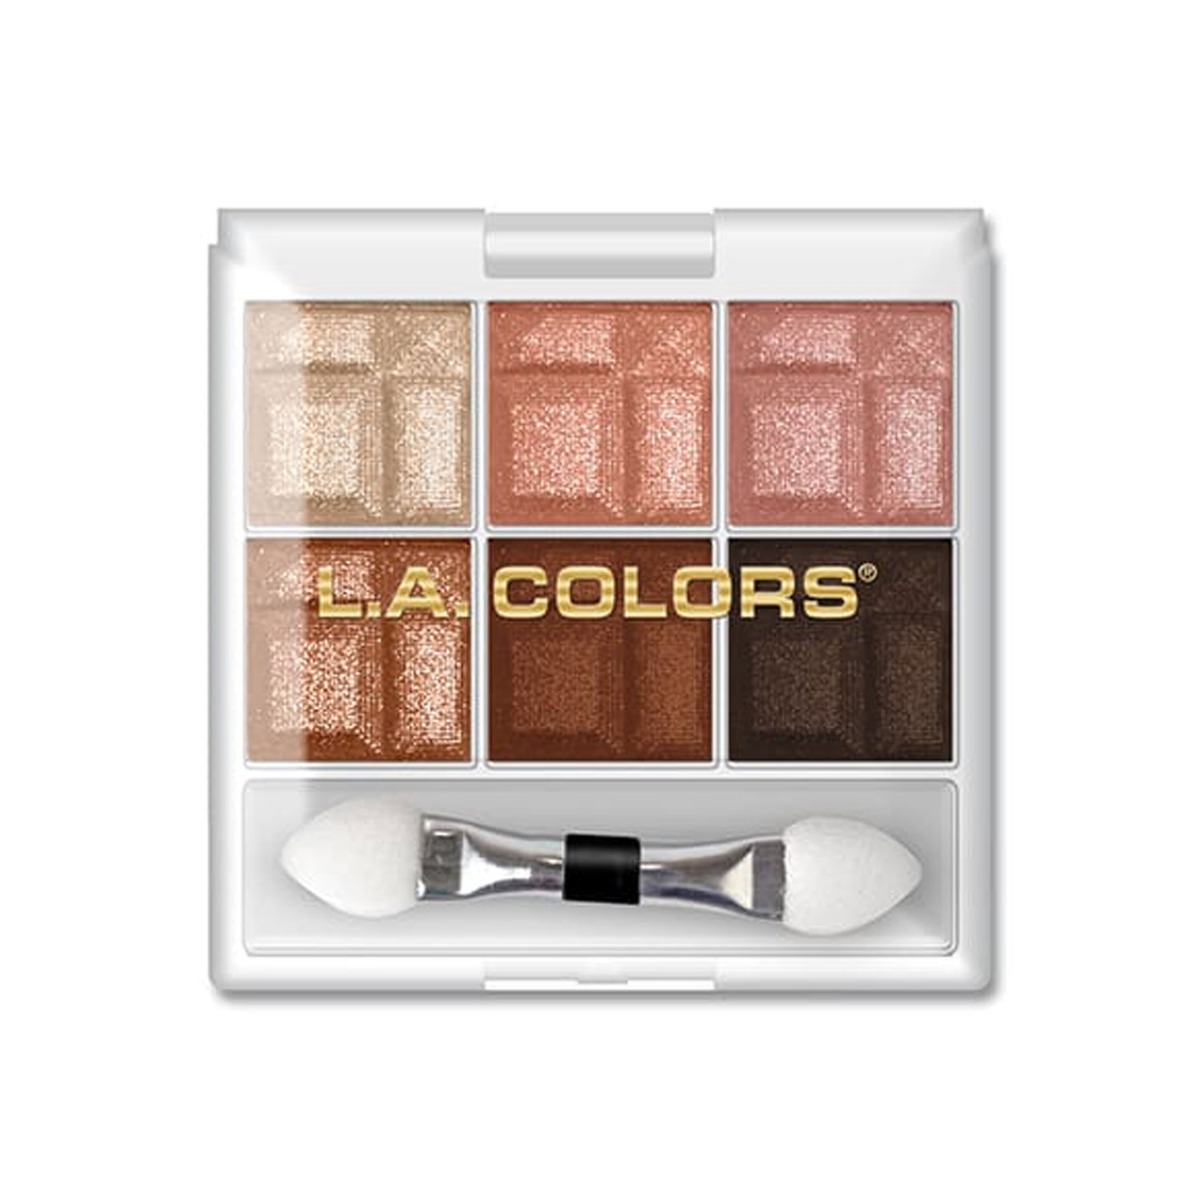 L.A. Colors 6 Color Eyeshadow Palette, Earthy, 4gm